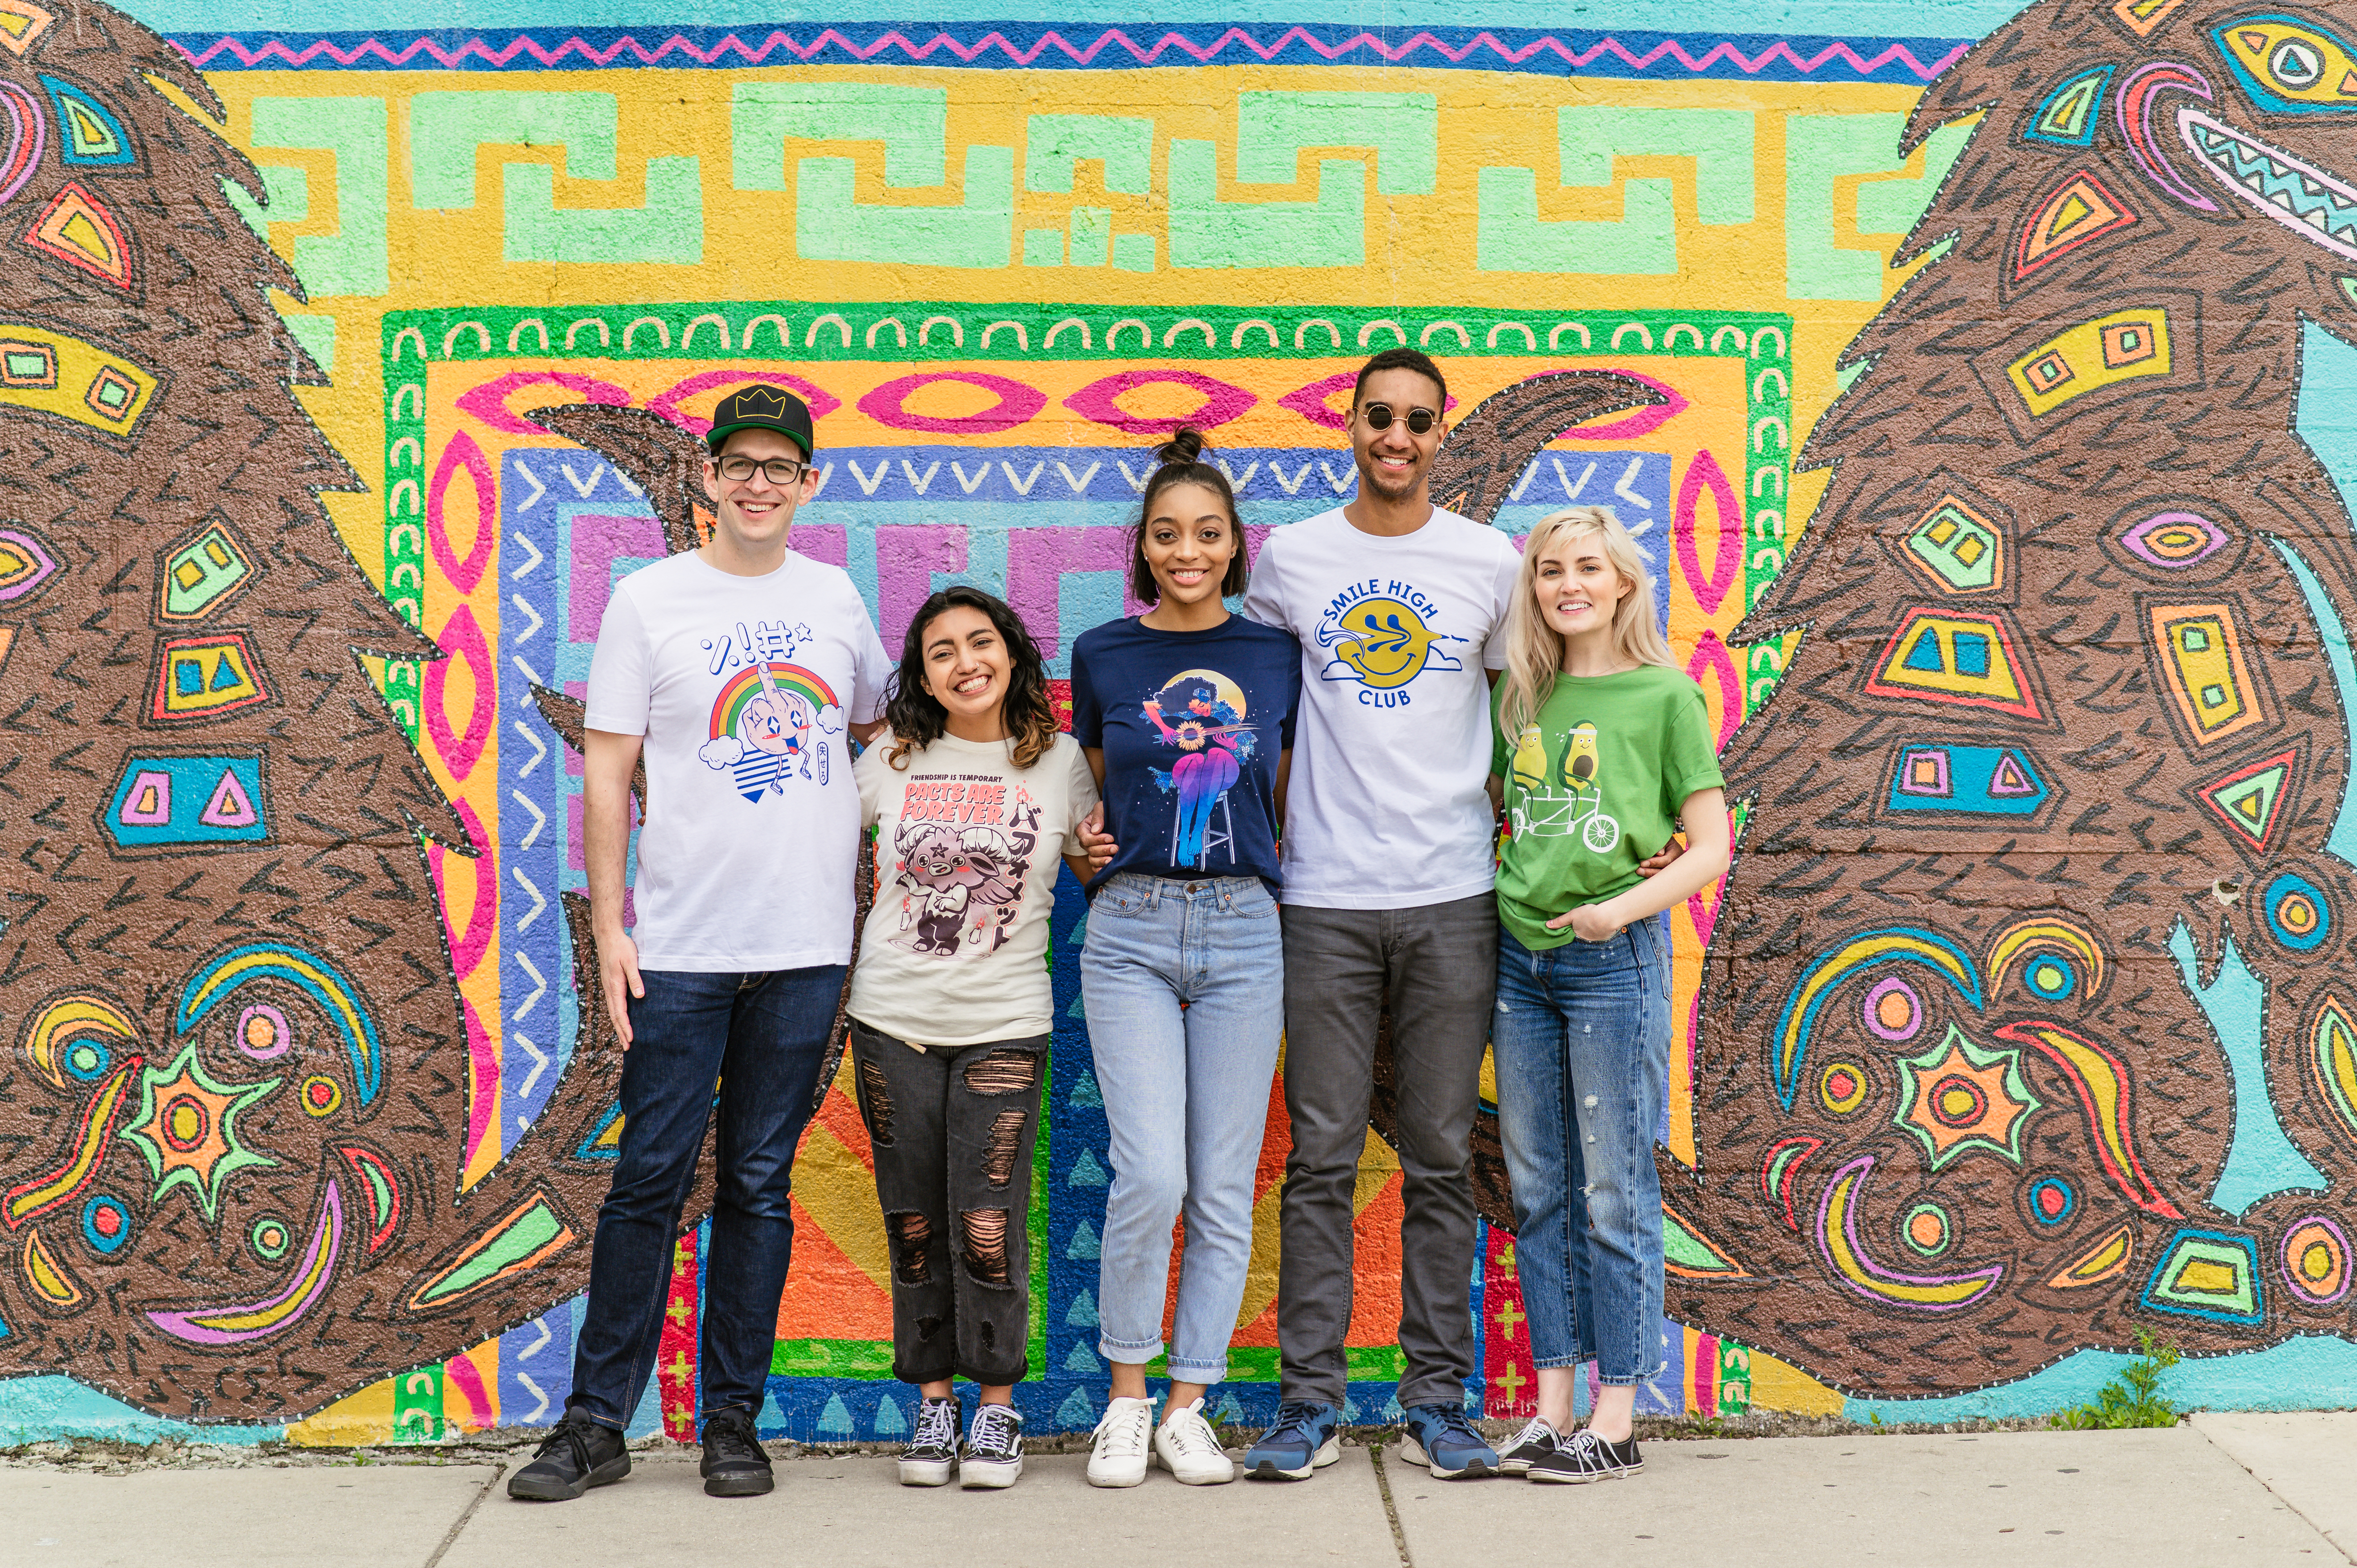 Guys and girls wearing t-shirts in front of mural